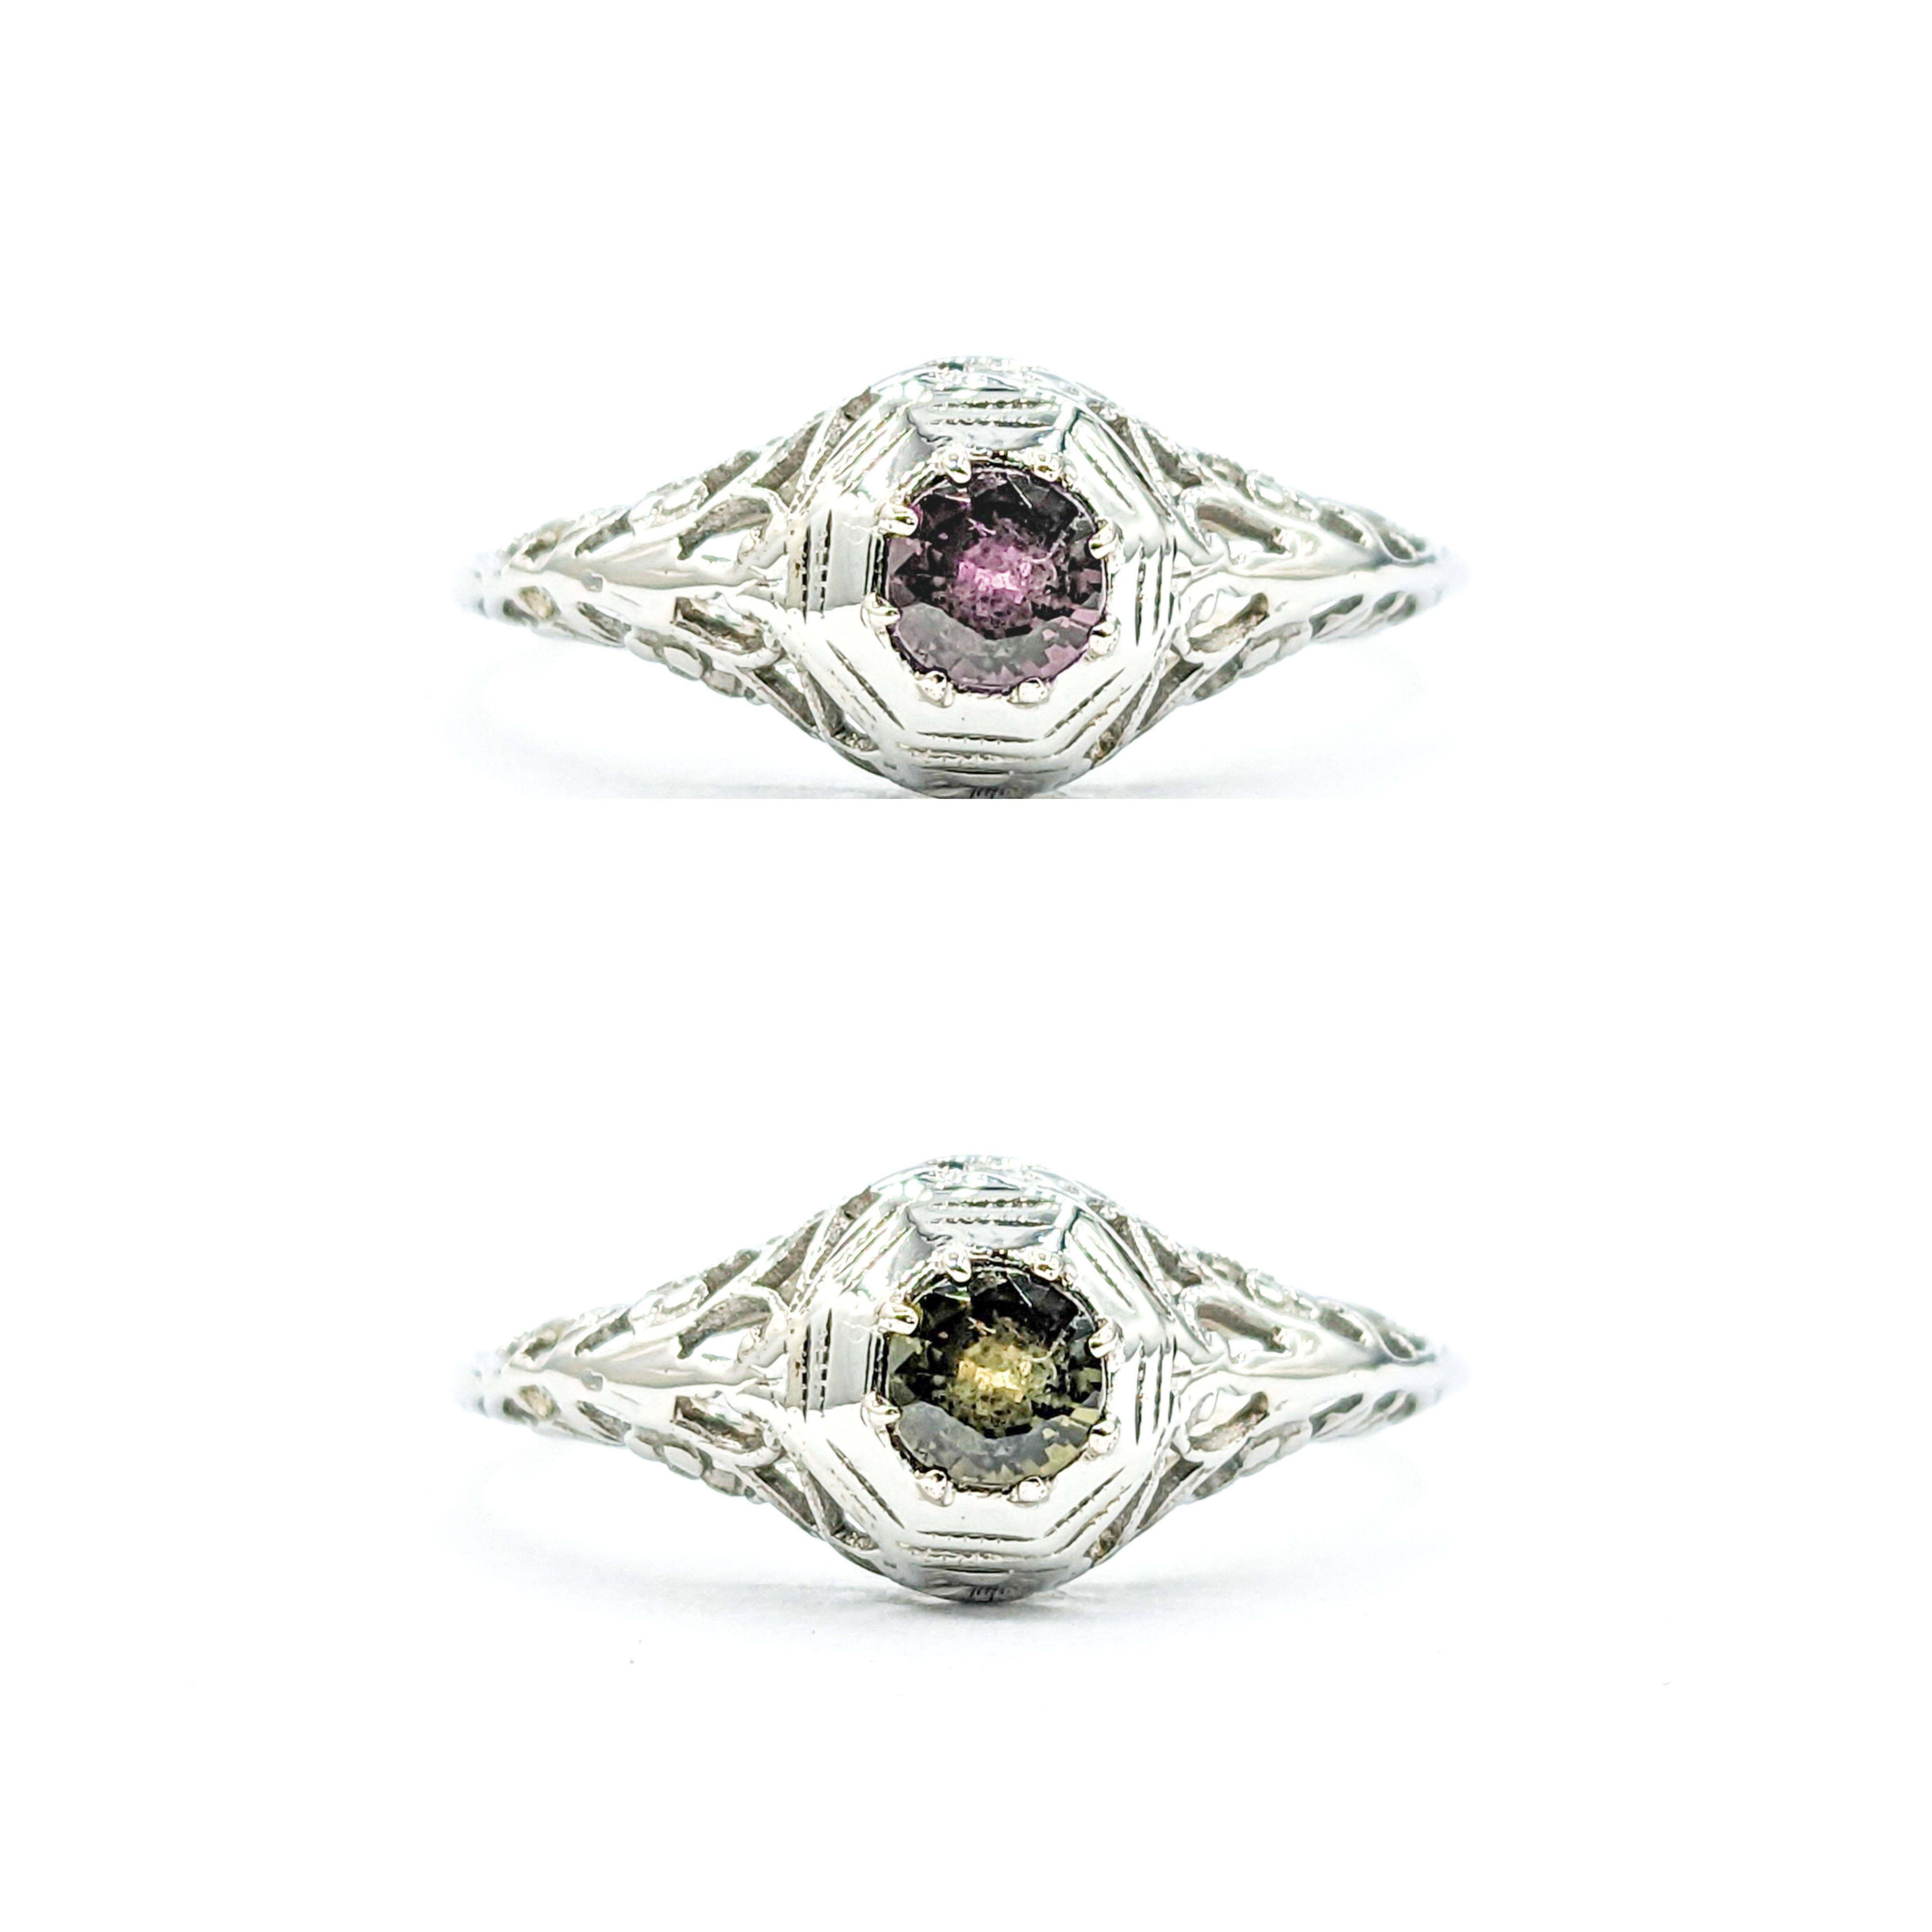 Romantic Natural Alexandrite Antique Ring in 18k White Gold 

Presenting this beautiful ring, a treasure of craftsmanship in 18k white gold. It is adorned with an .28ct round natural Alexandrite, a gemstone celebrated for its enchanting